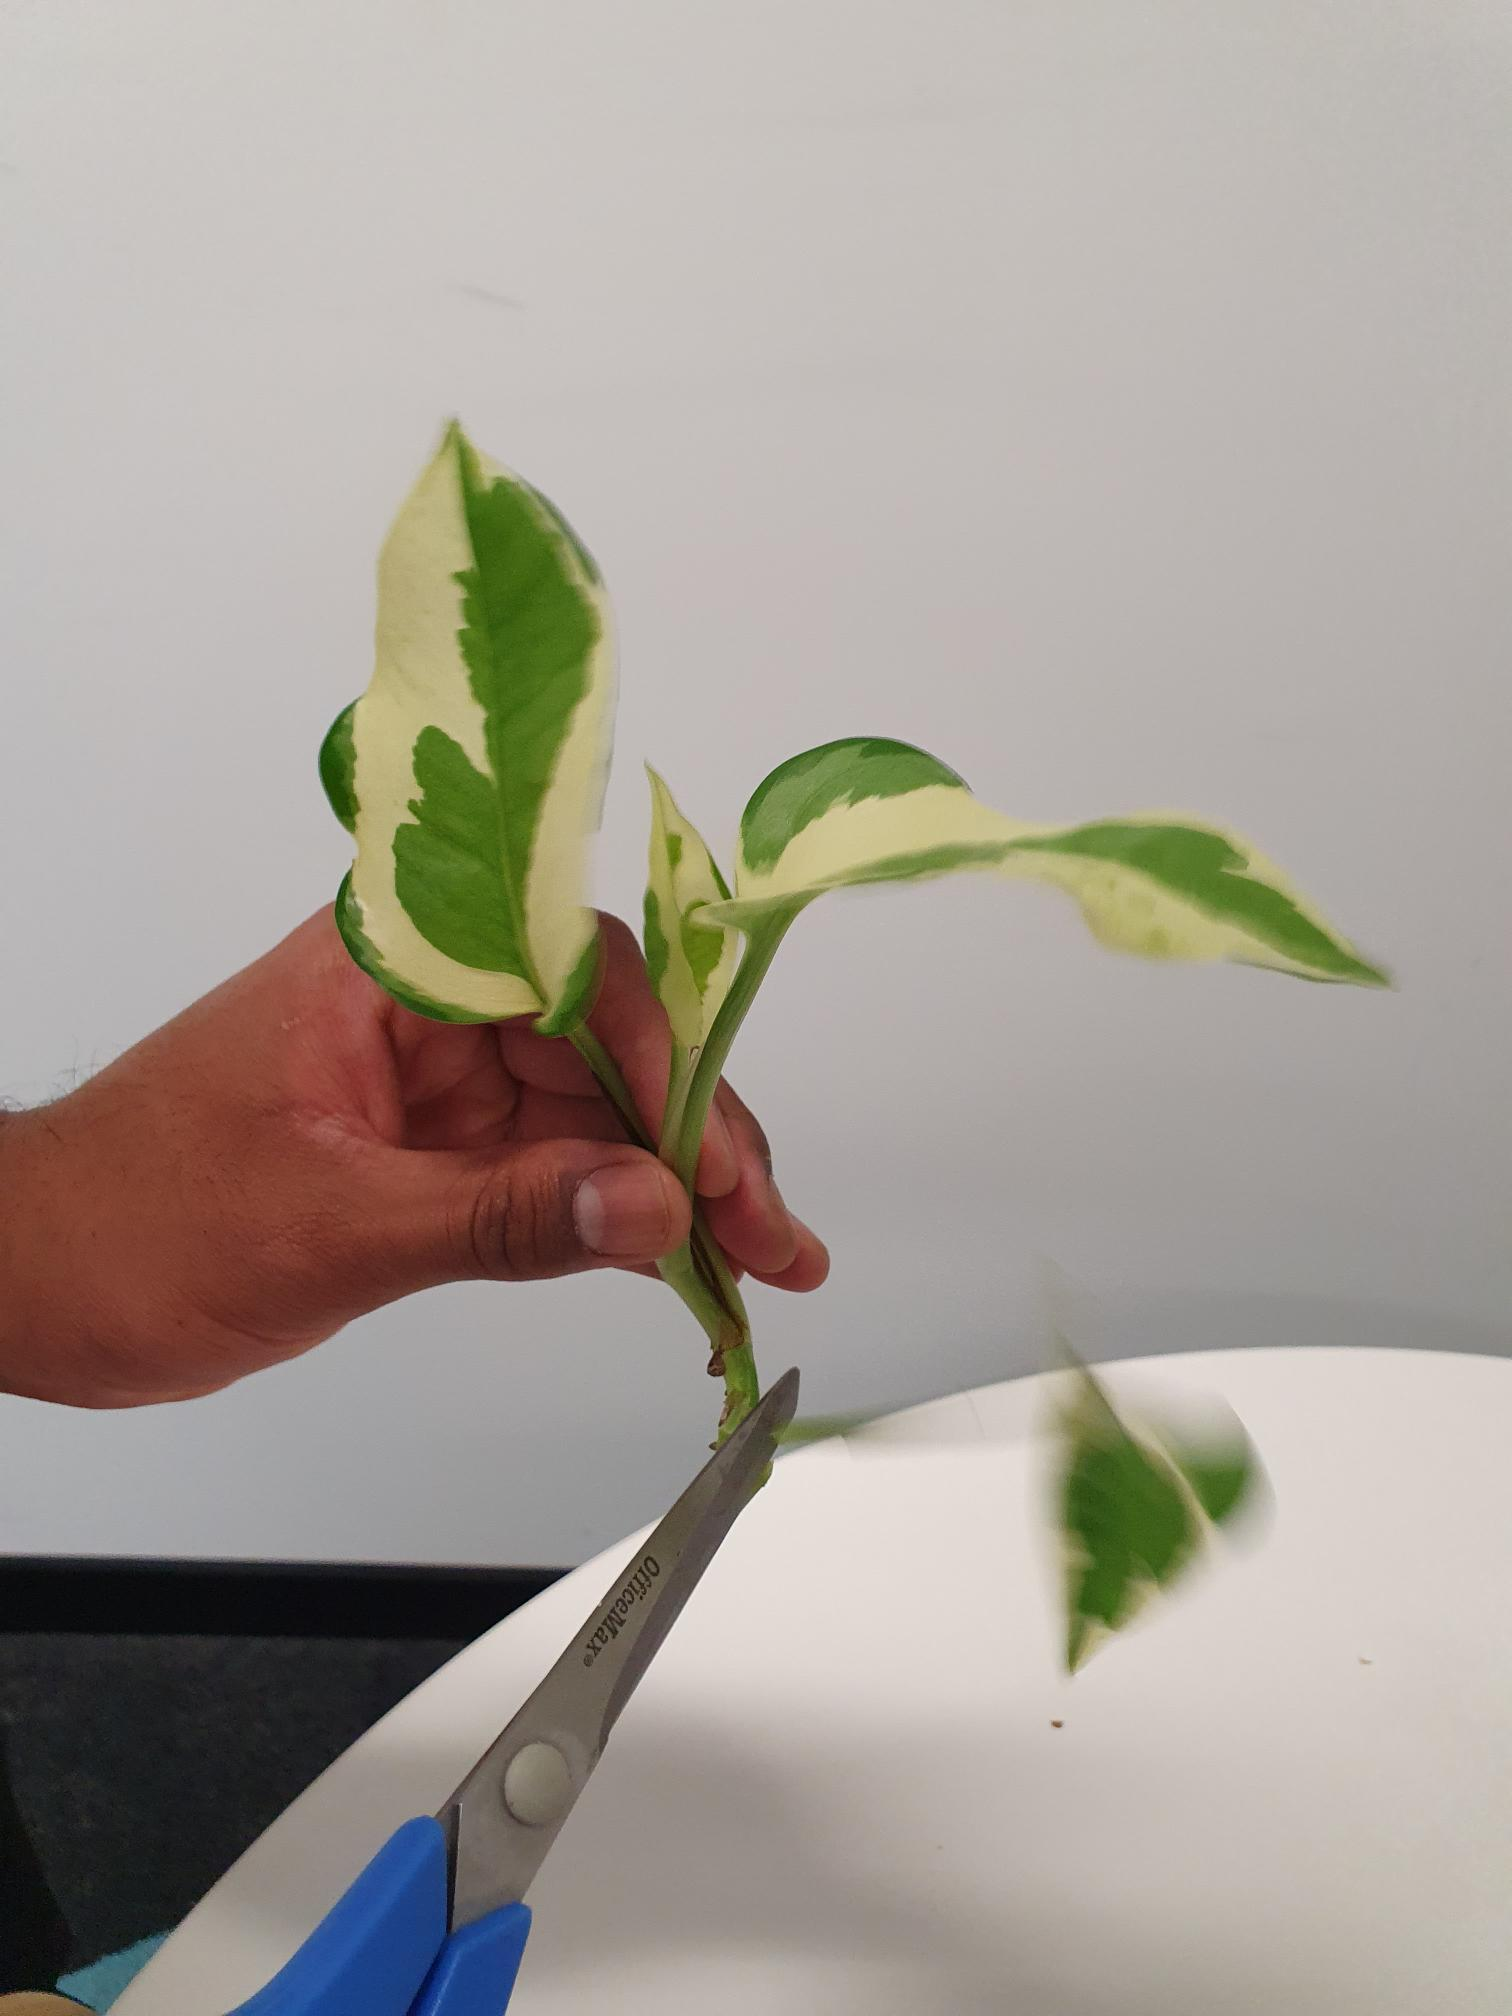 Trimming leaves